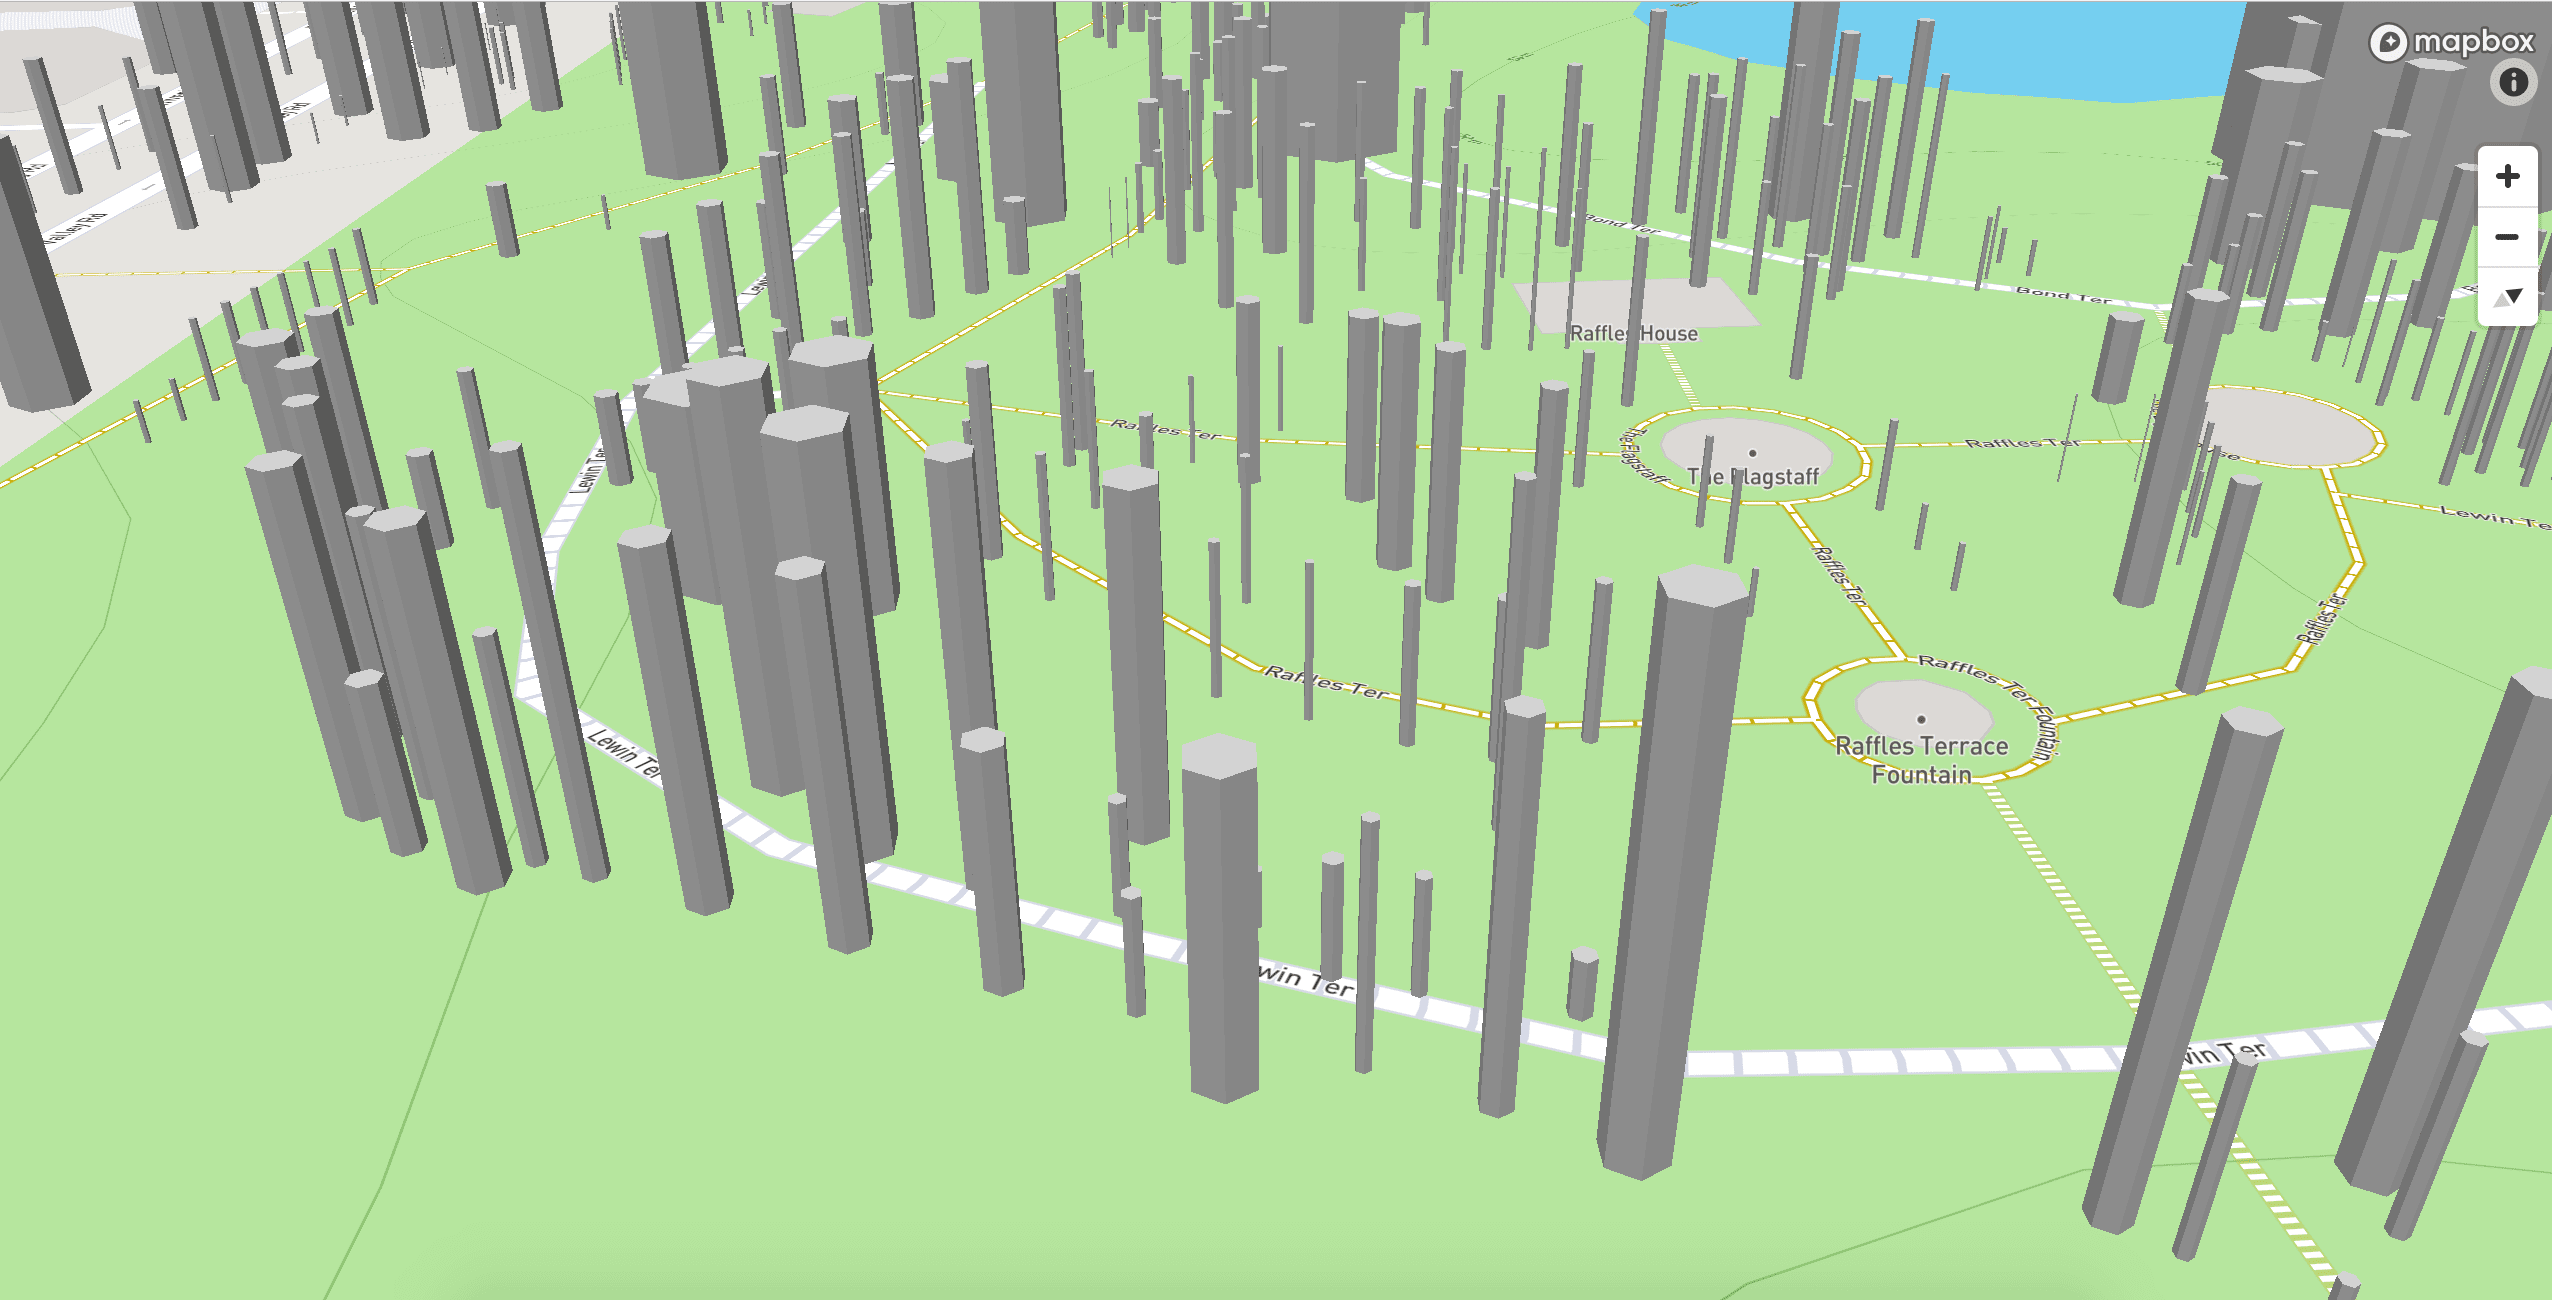 3D trees rendered based on girth and height on a map in Singapore, zoomed in close-up